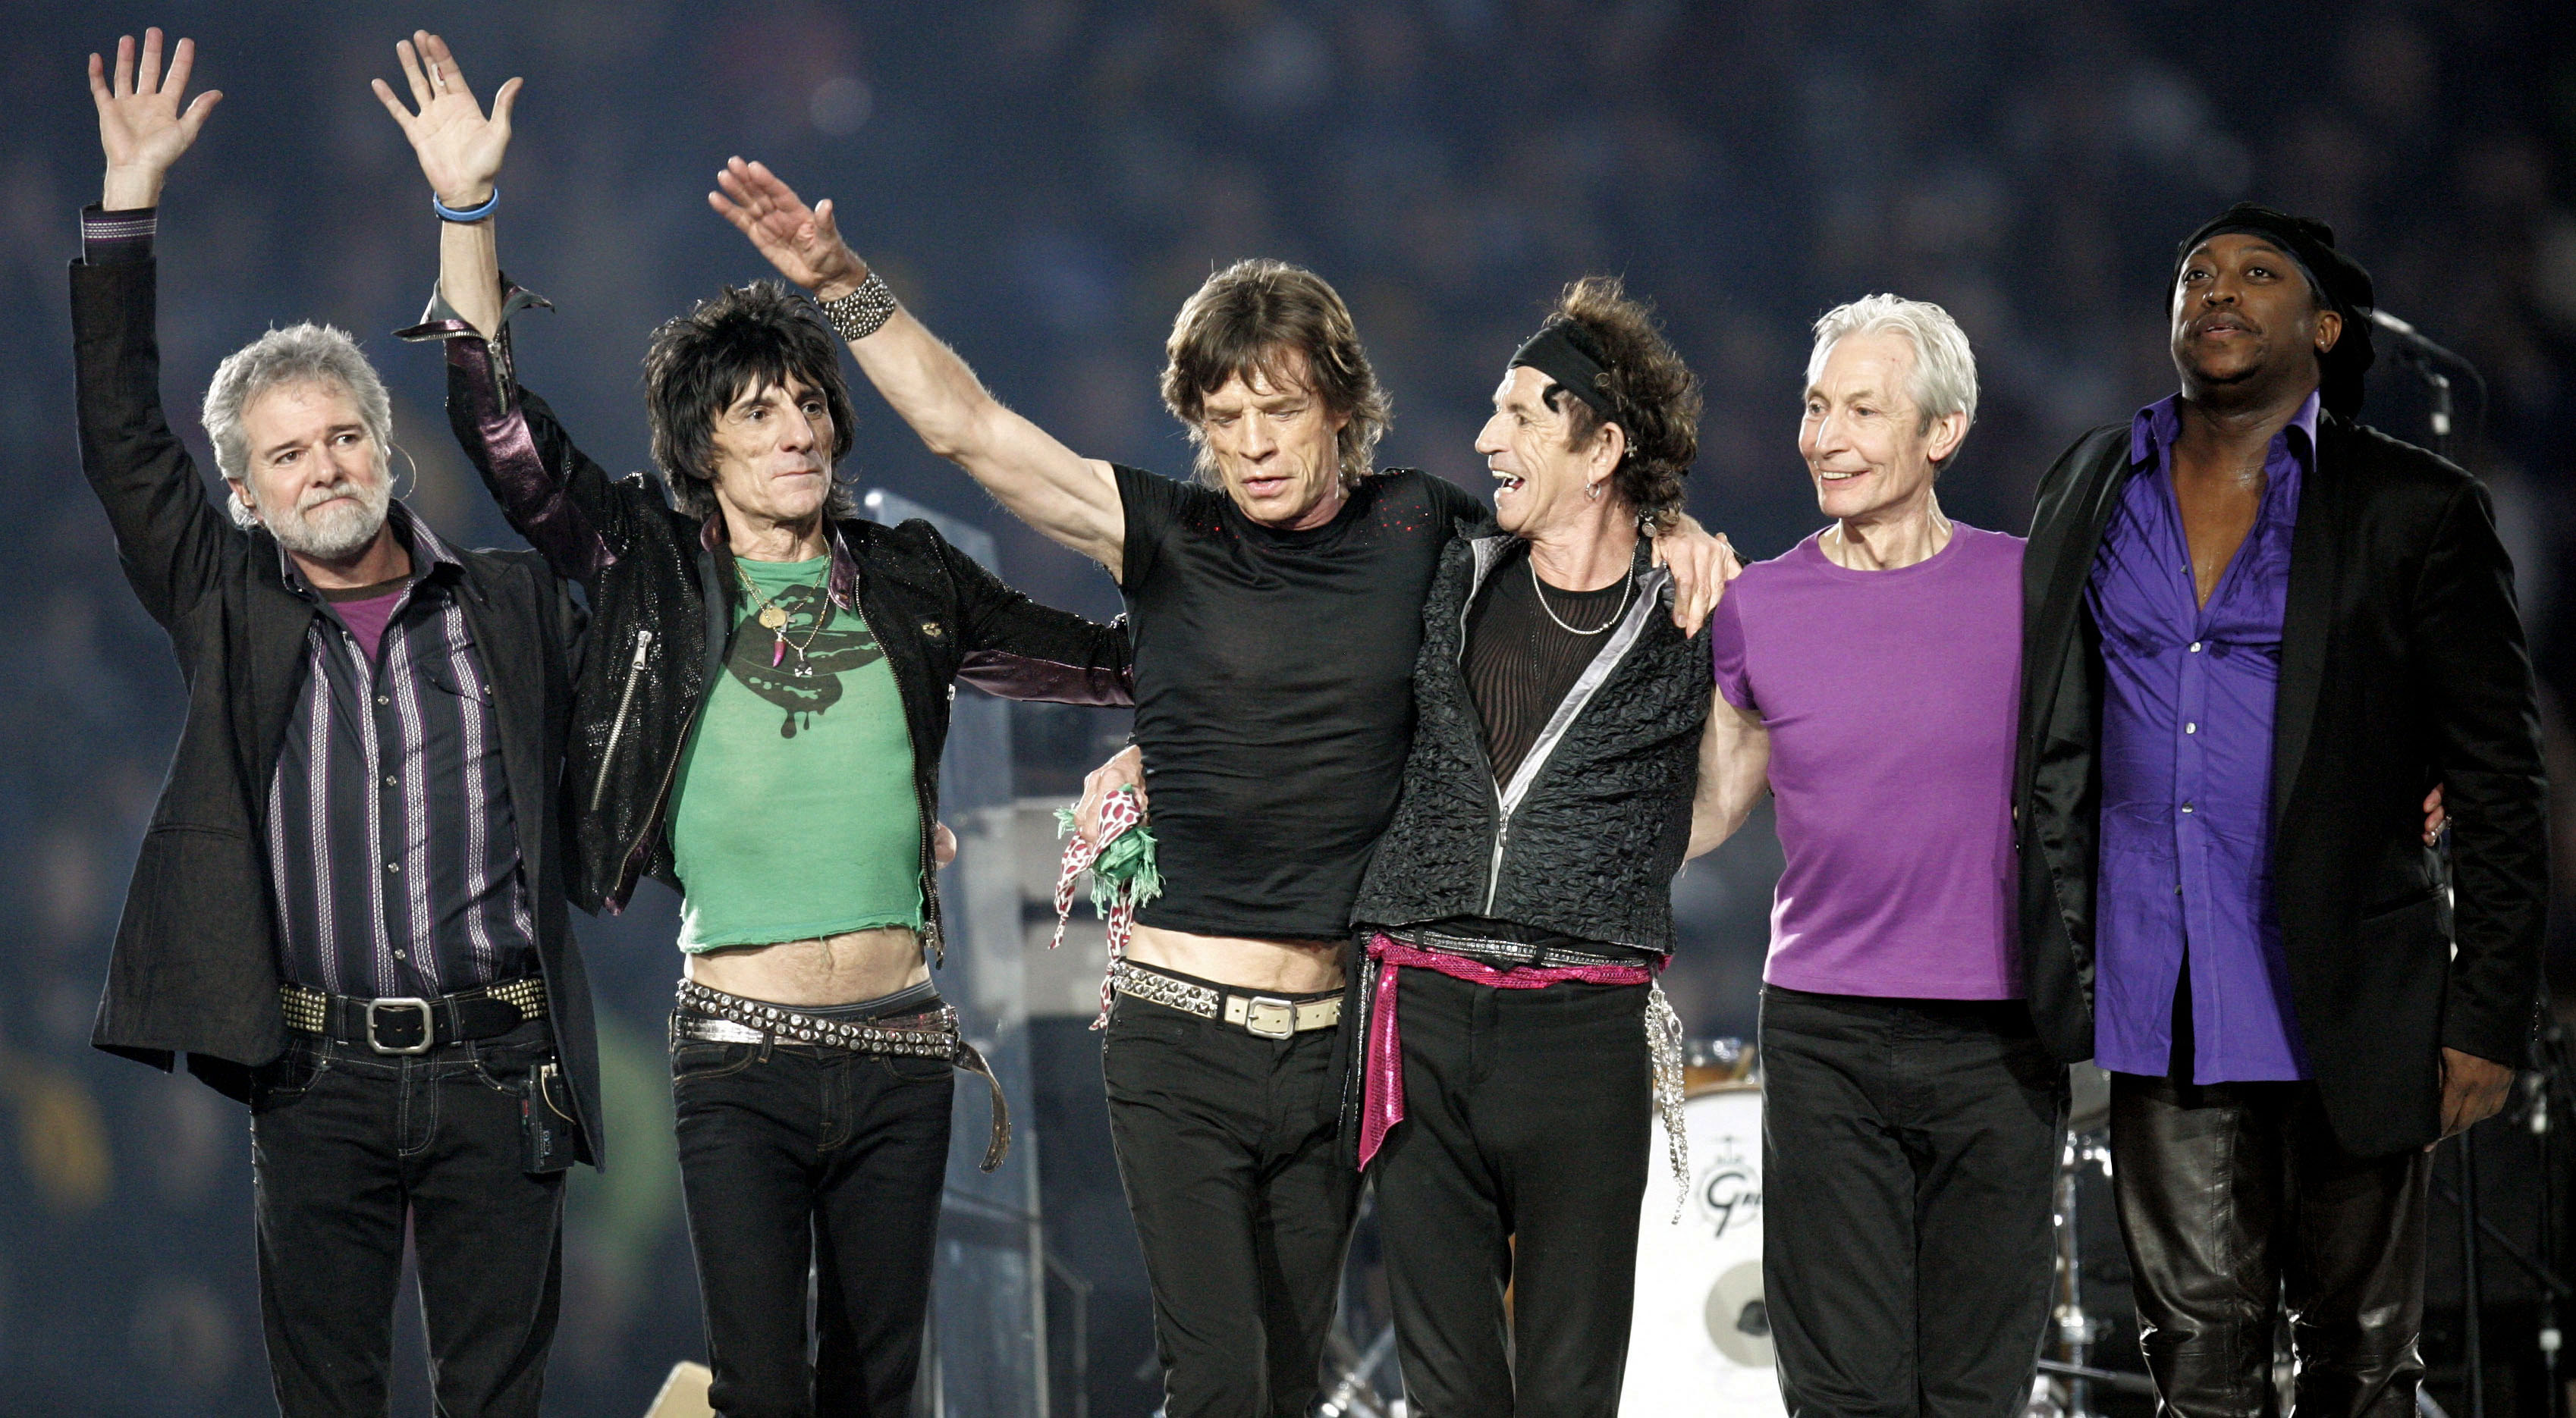 Rolling Stones to play first-ever show in Cuba - CBS News3396 x 1870